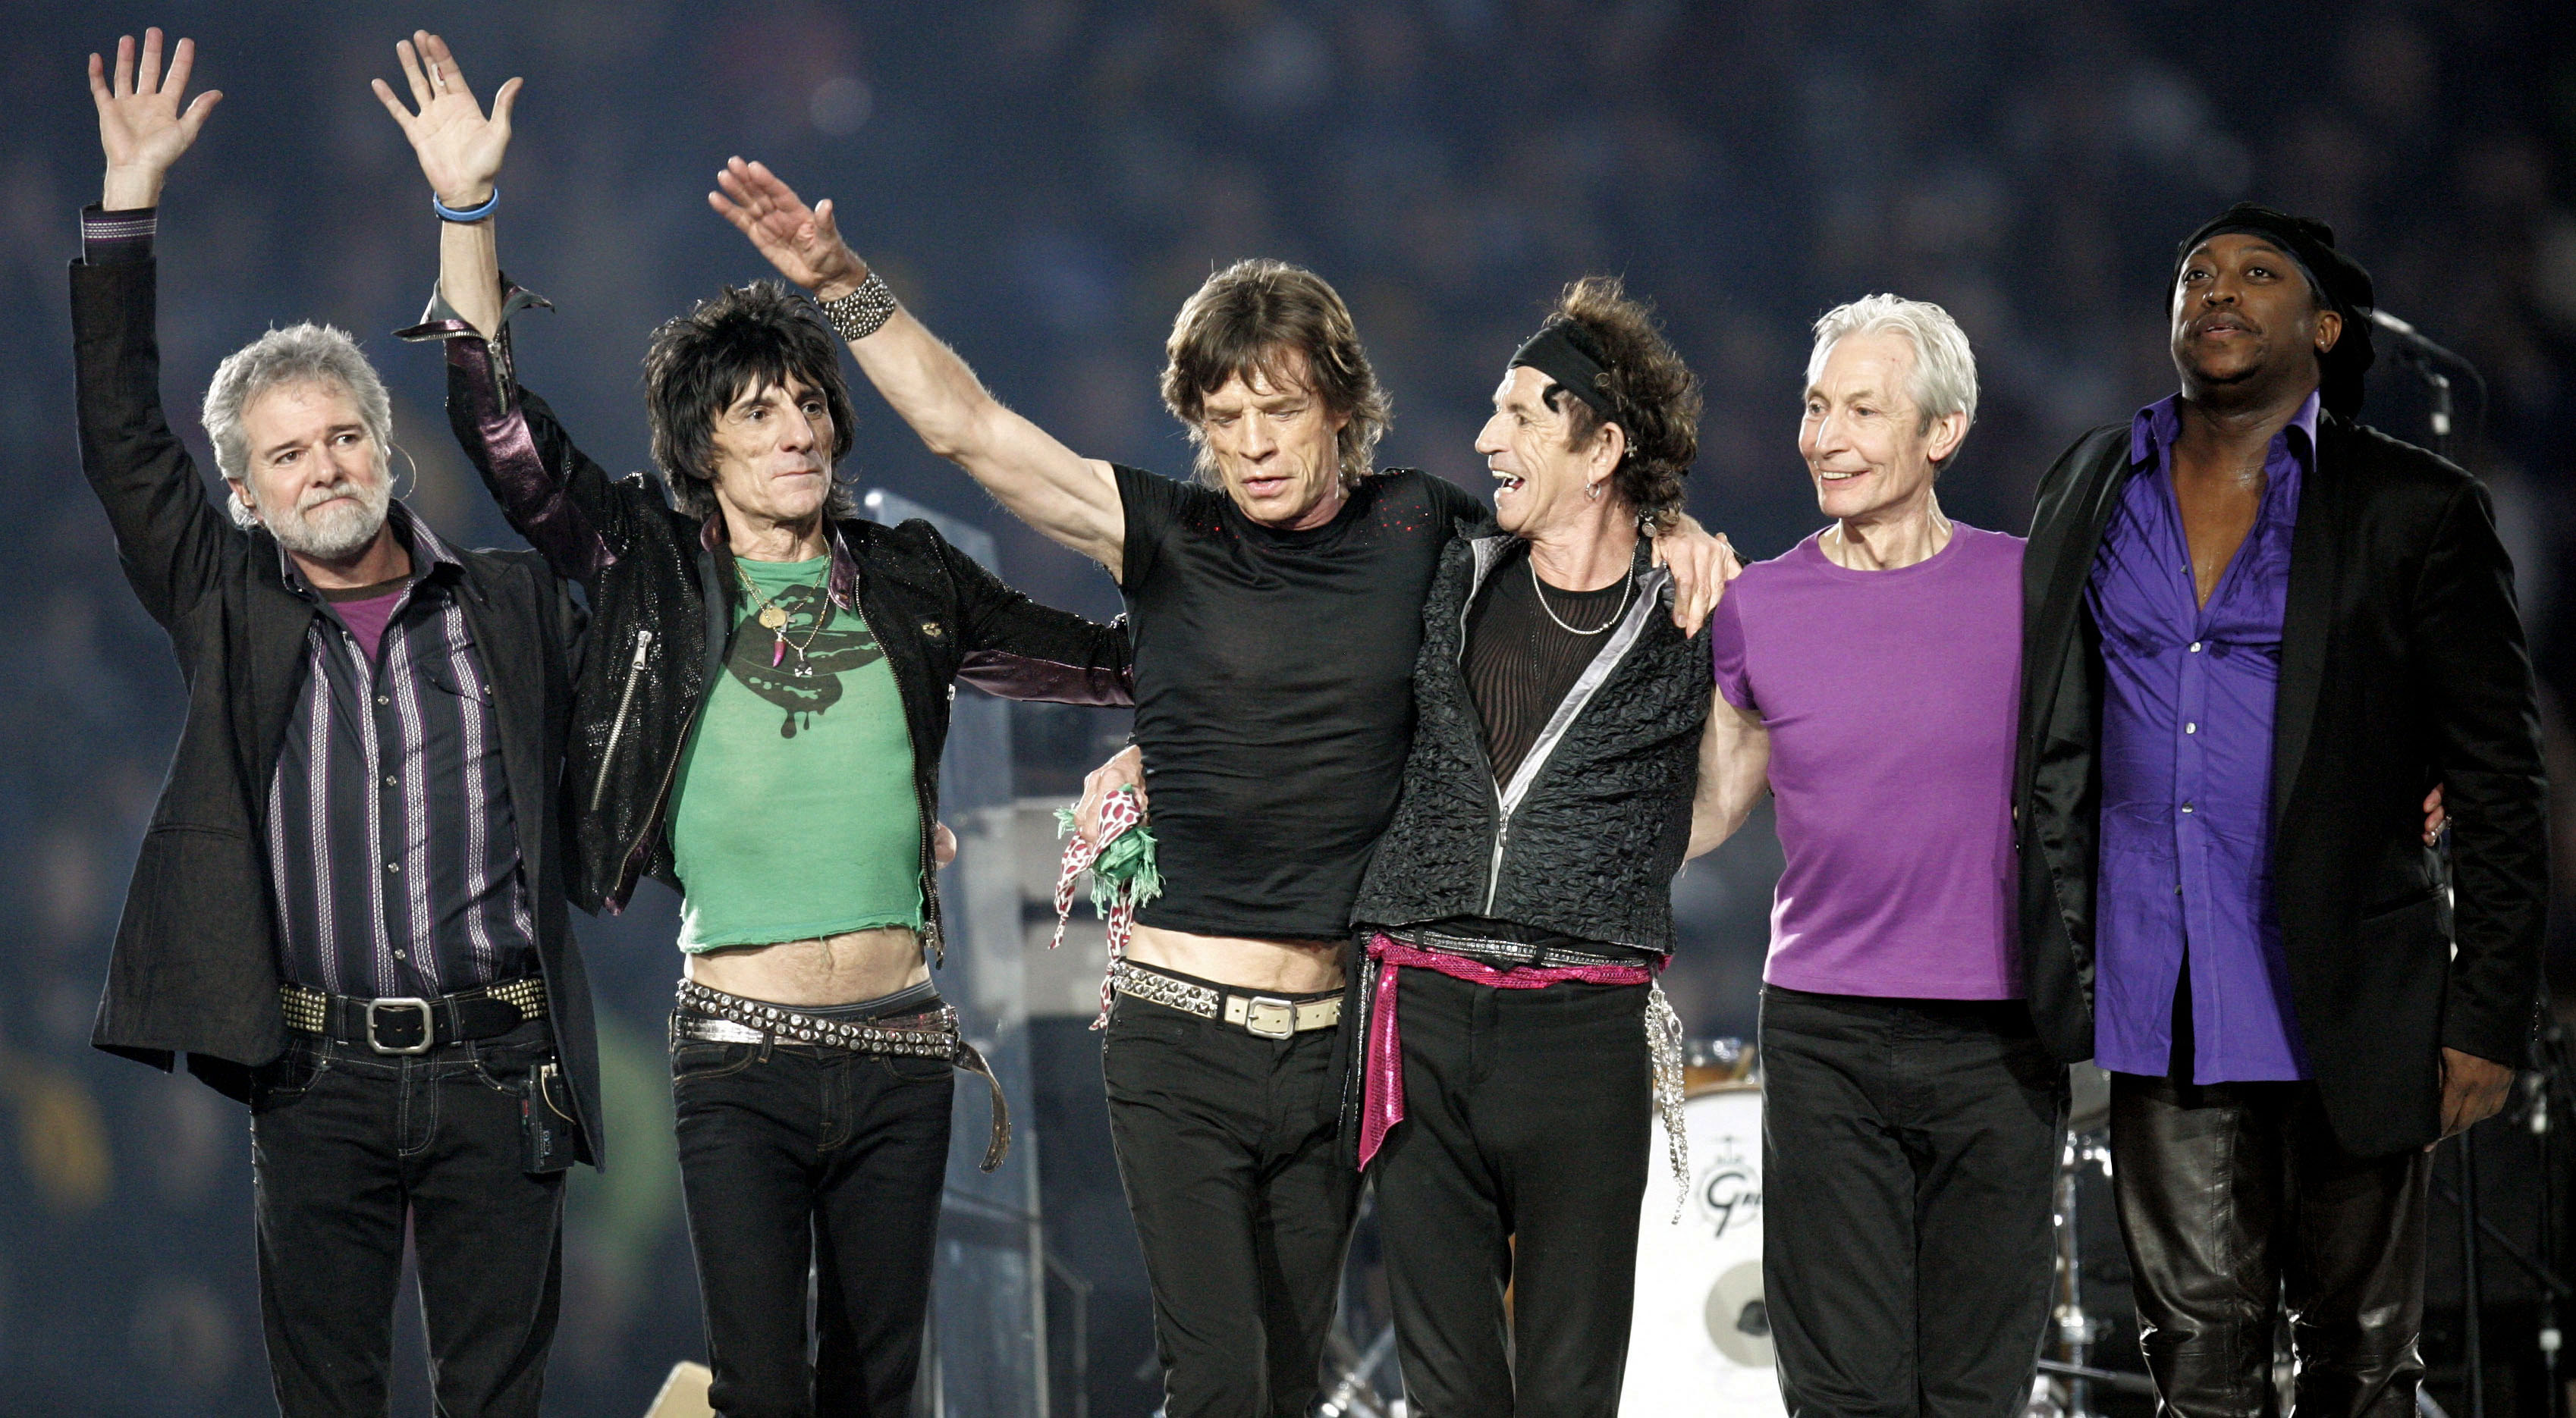 Rolling Stones to play first-ever show in Cuba - CBS News3396 x 1870